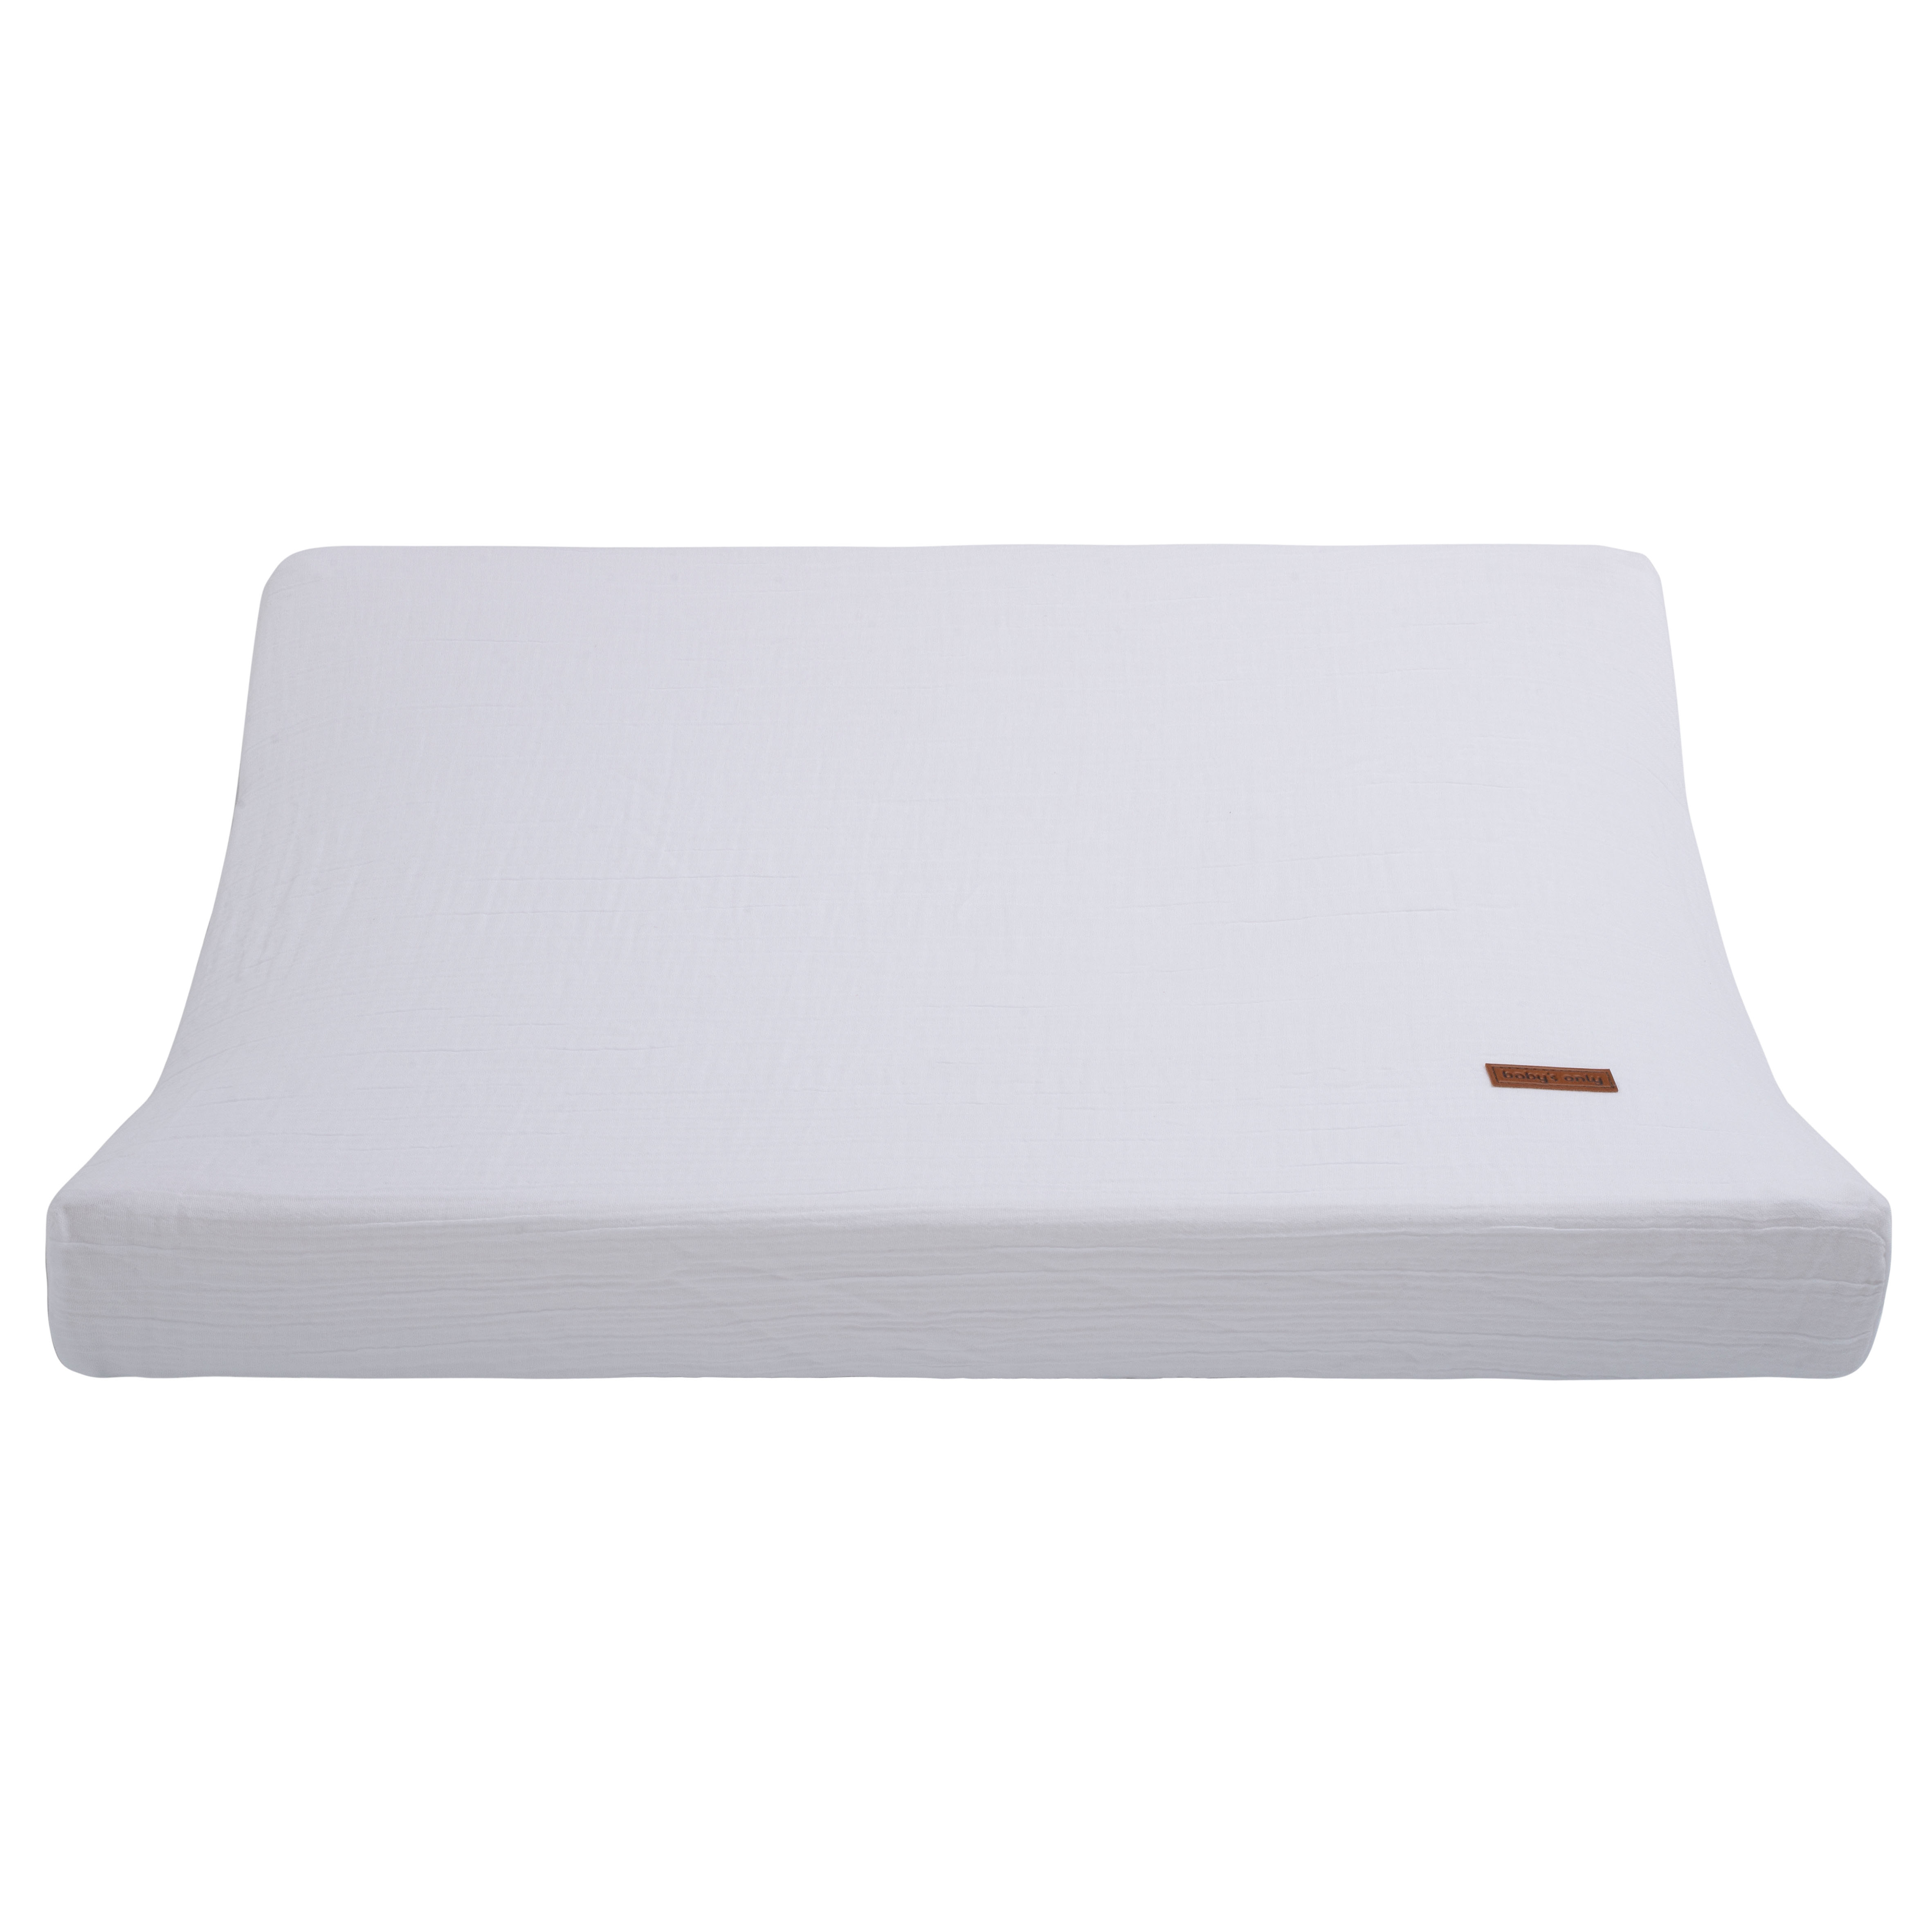 Changing pad cover Breeze white - 45x70